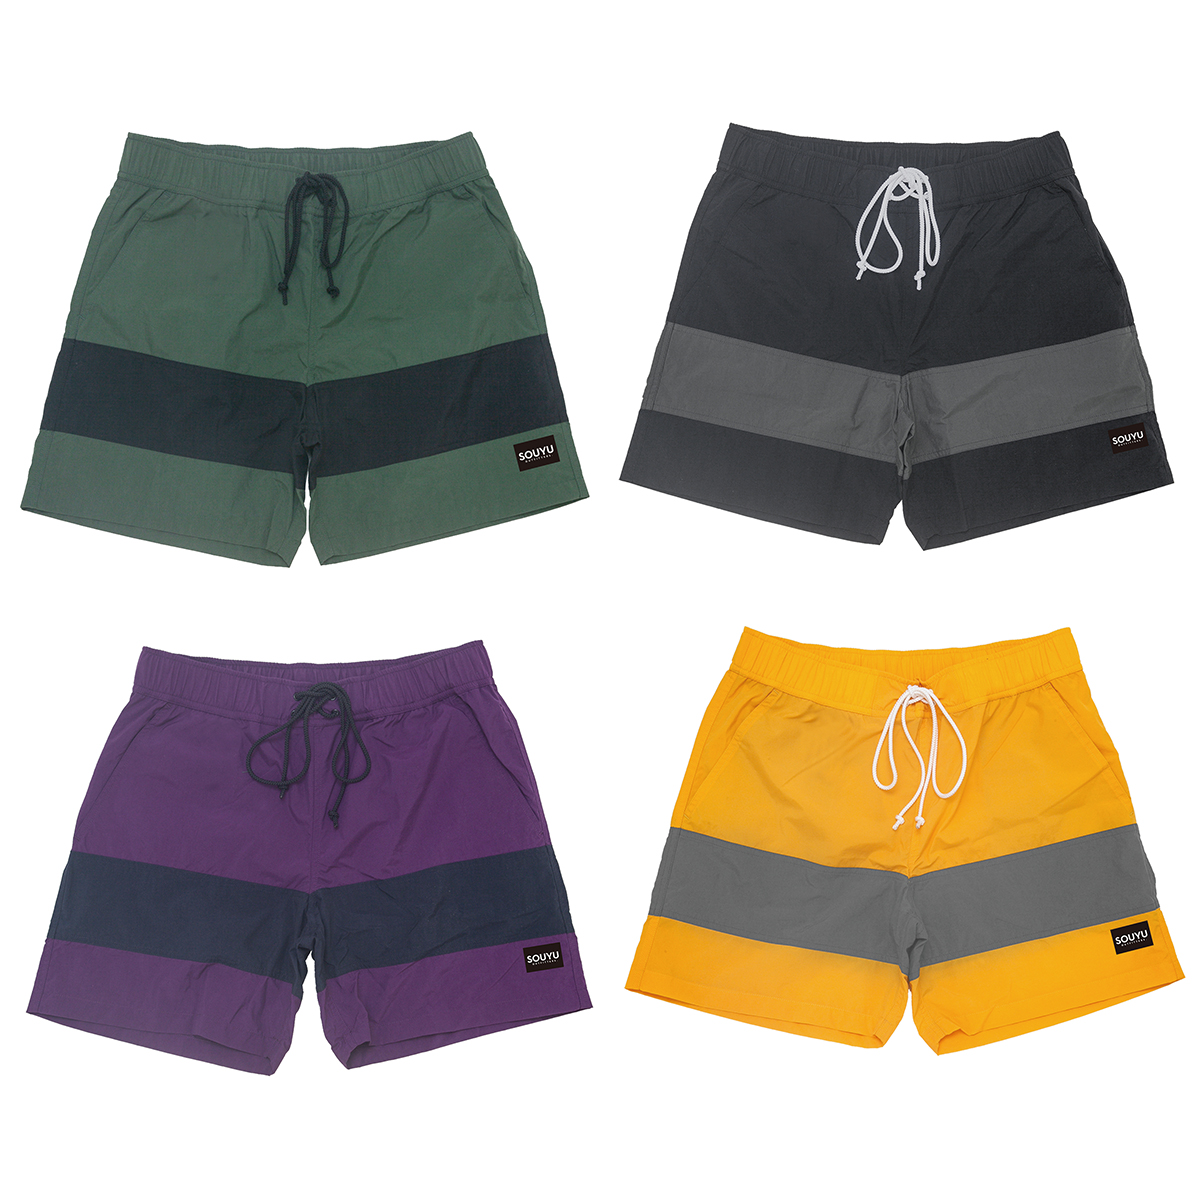 SURF VIBES SHORT サーフバイブスショーツ Number : s20-so-08 Fabric :Nylon 100% Size : XS, S, M, L, XL Color:Olive × Black, Black × Gray, Purple × Navy, Yellow × Gray Price : ¥11,800